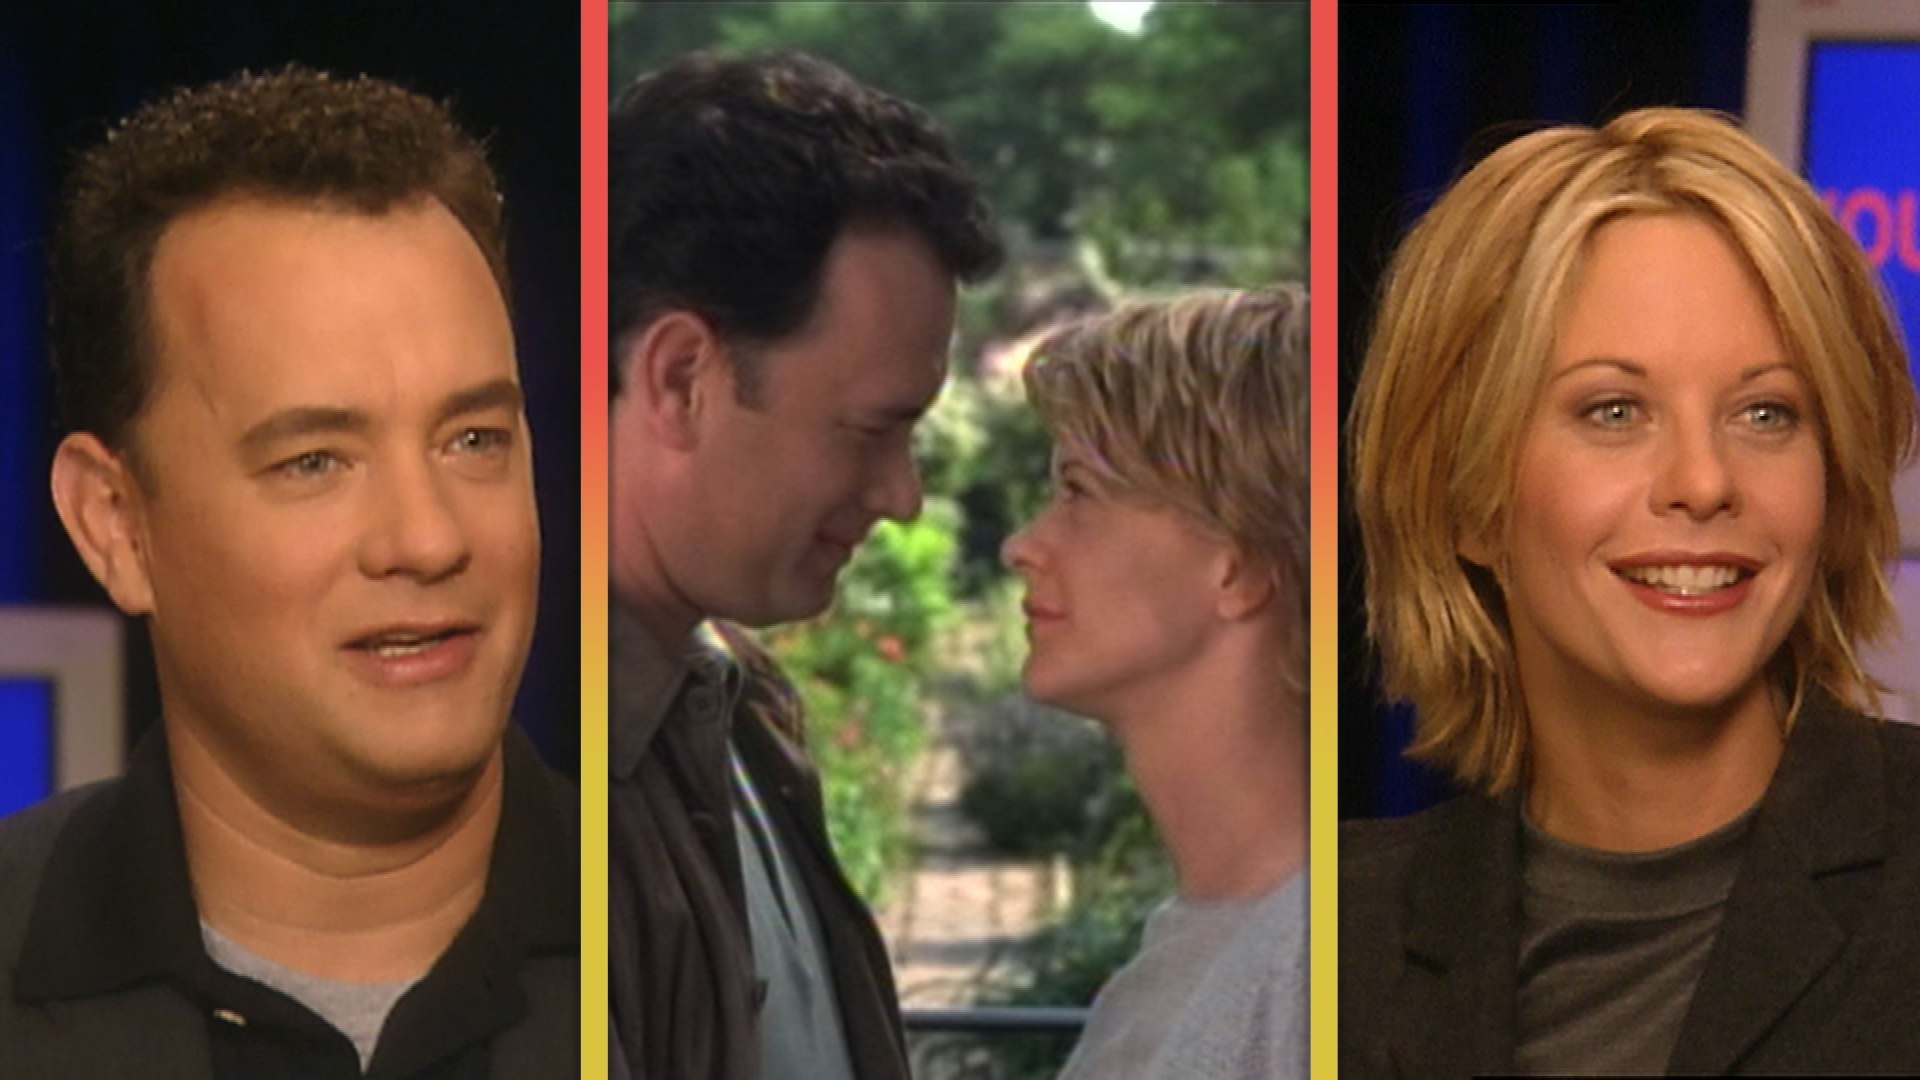 You've Got Mail' turns 20: All the best quotes from the rom-com